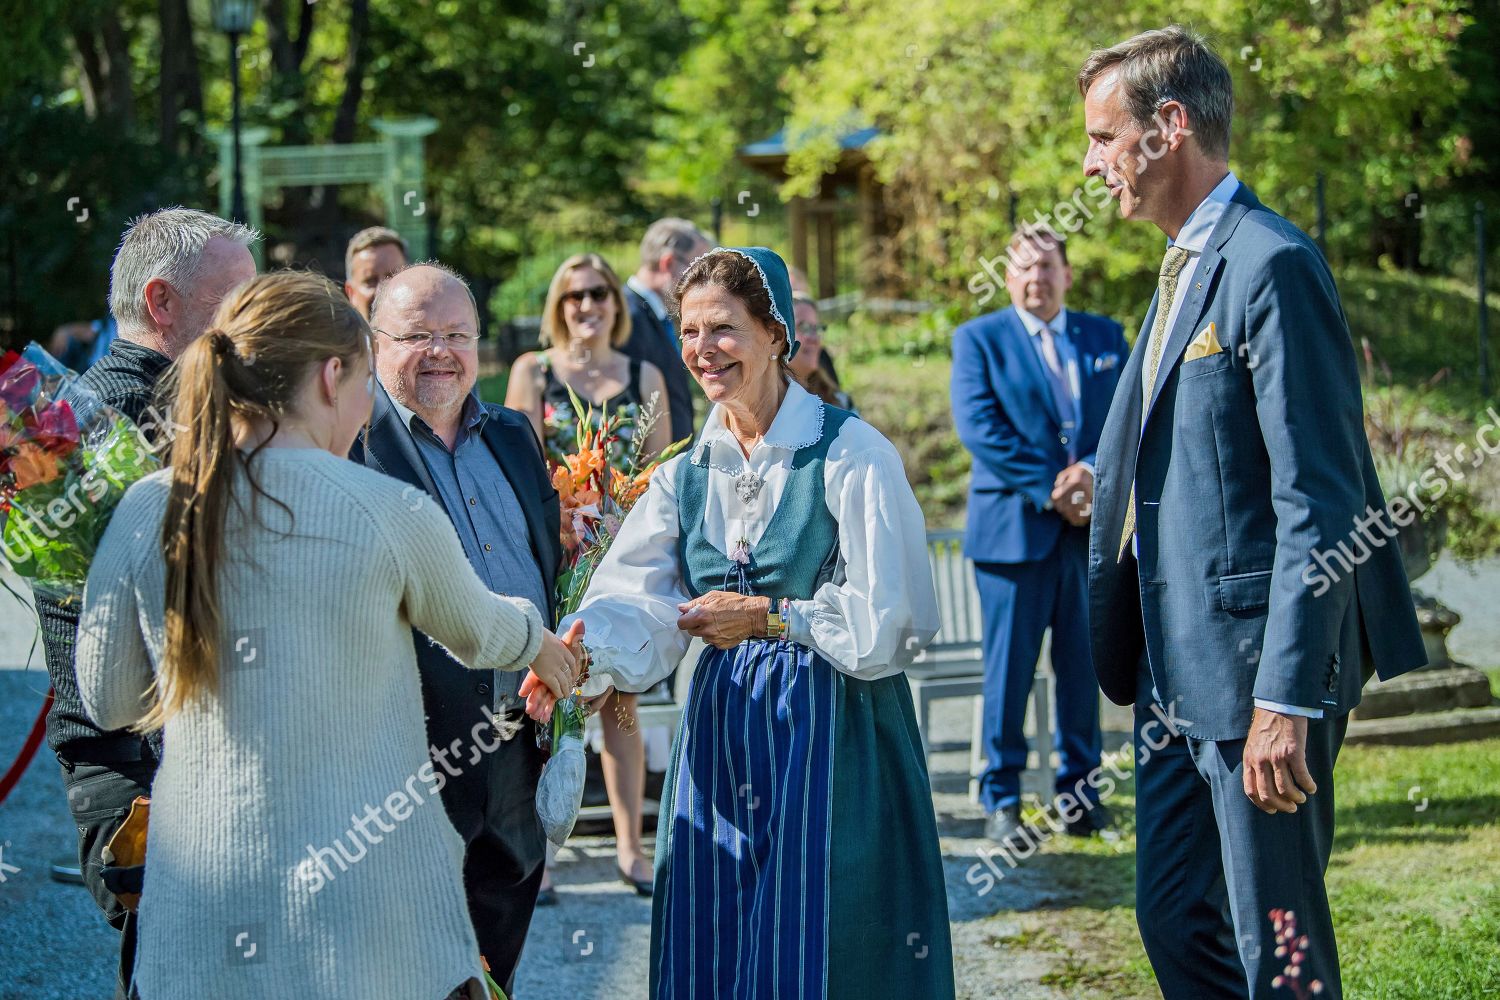 pensioners-day-at-ekebyhov-palace-park-stockholm-sweden-shutterstock-editorial-10373674ao.jpg